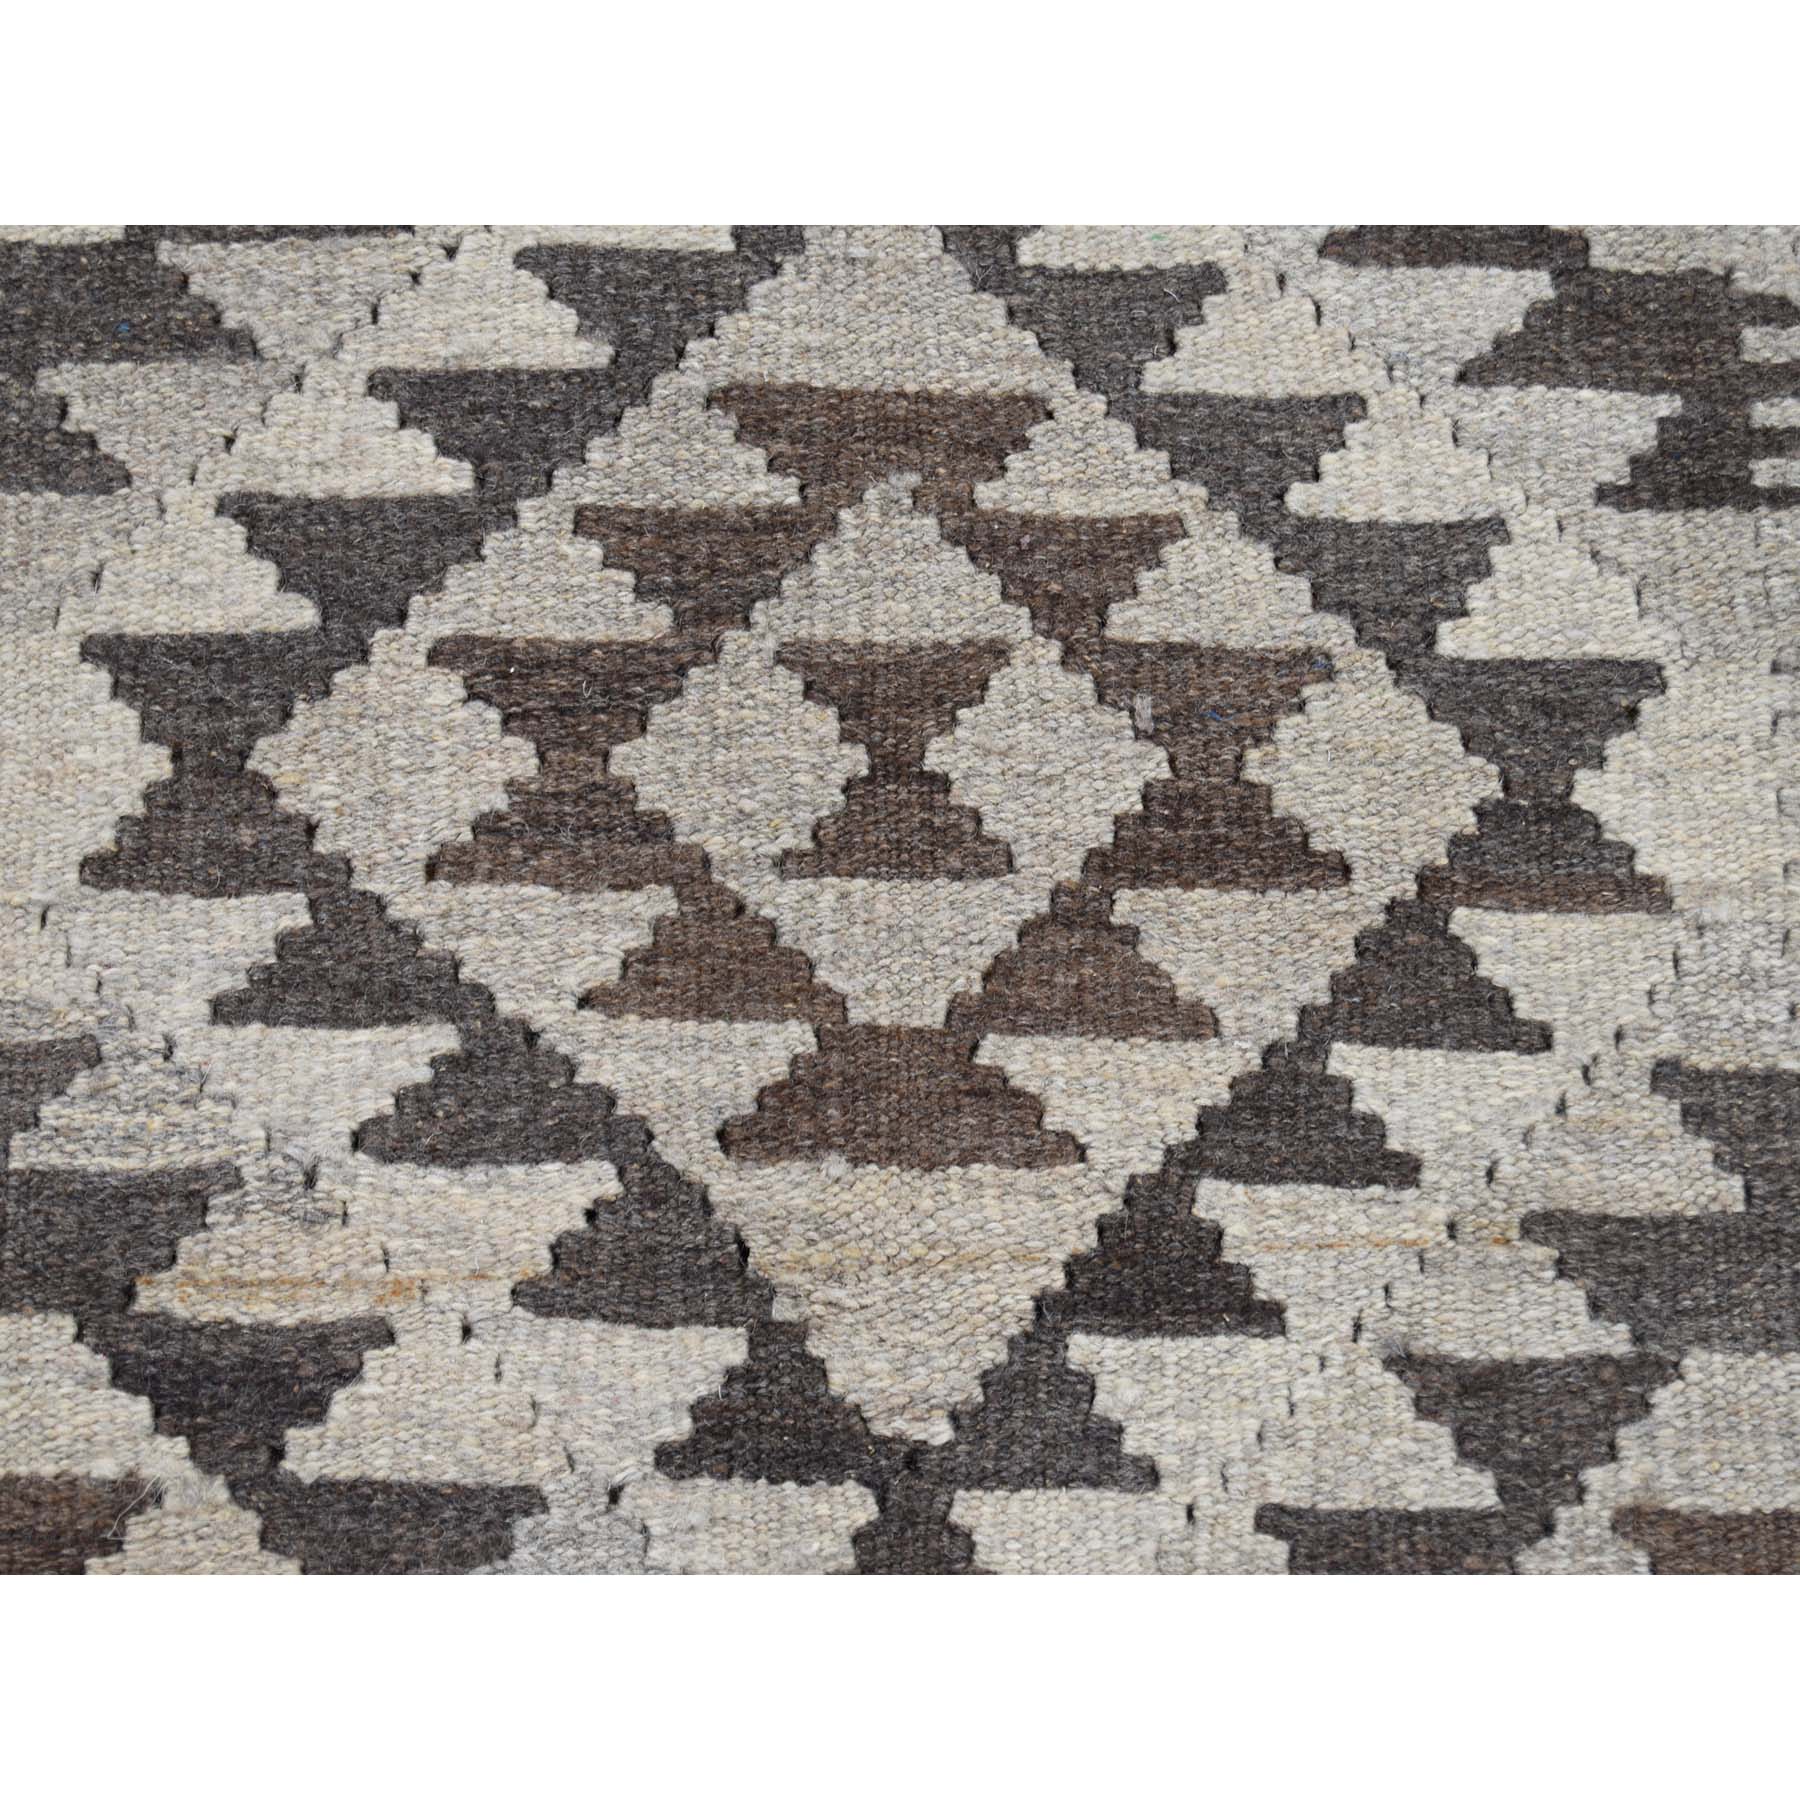 2-9 x4- Afghan Kilim Reversible Undyed Natural Wool Hand Woven Oriental Rug 